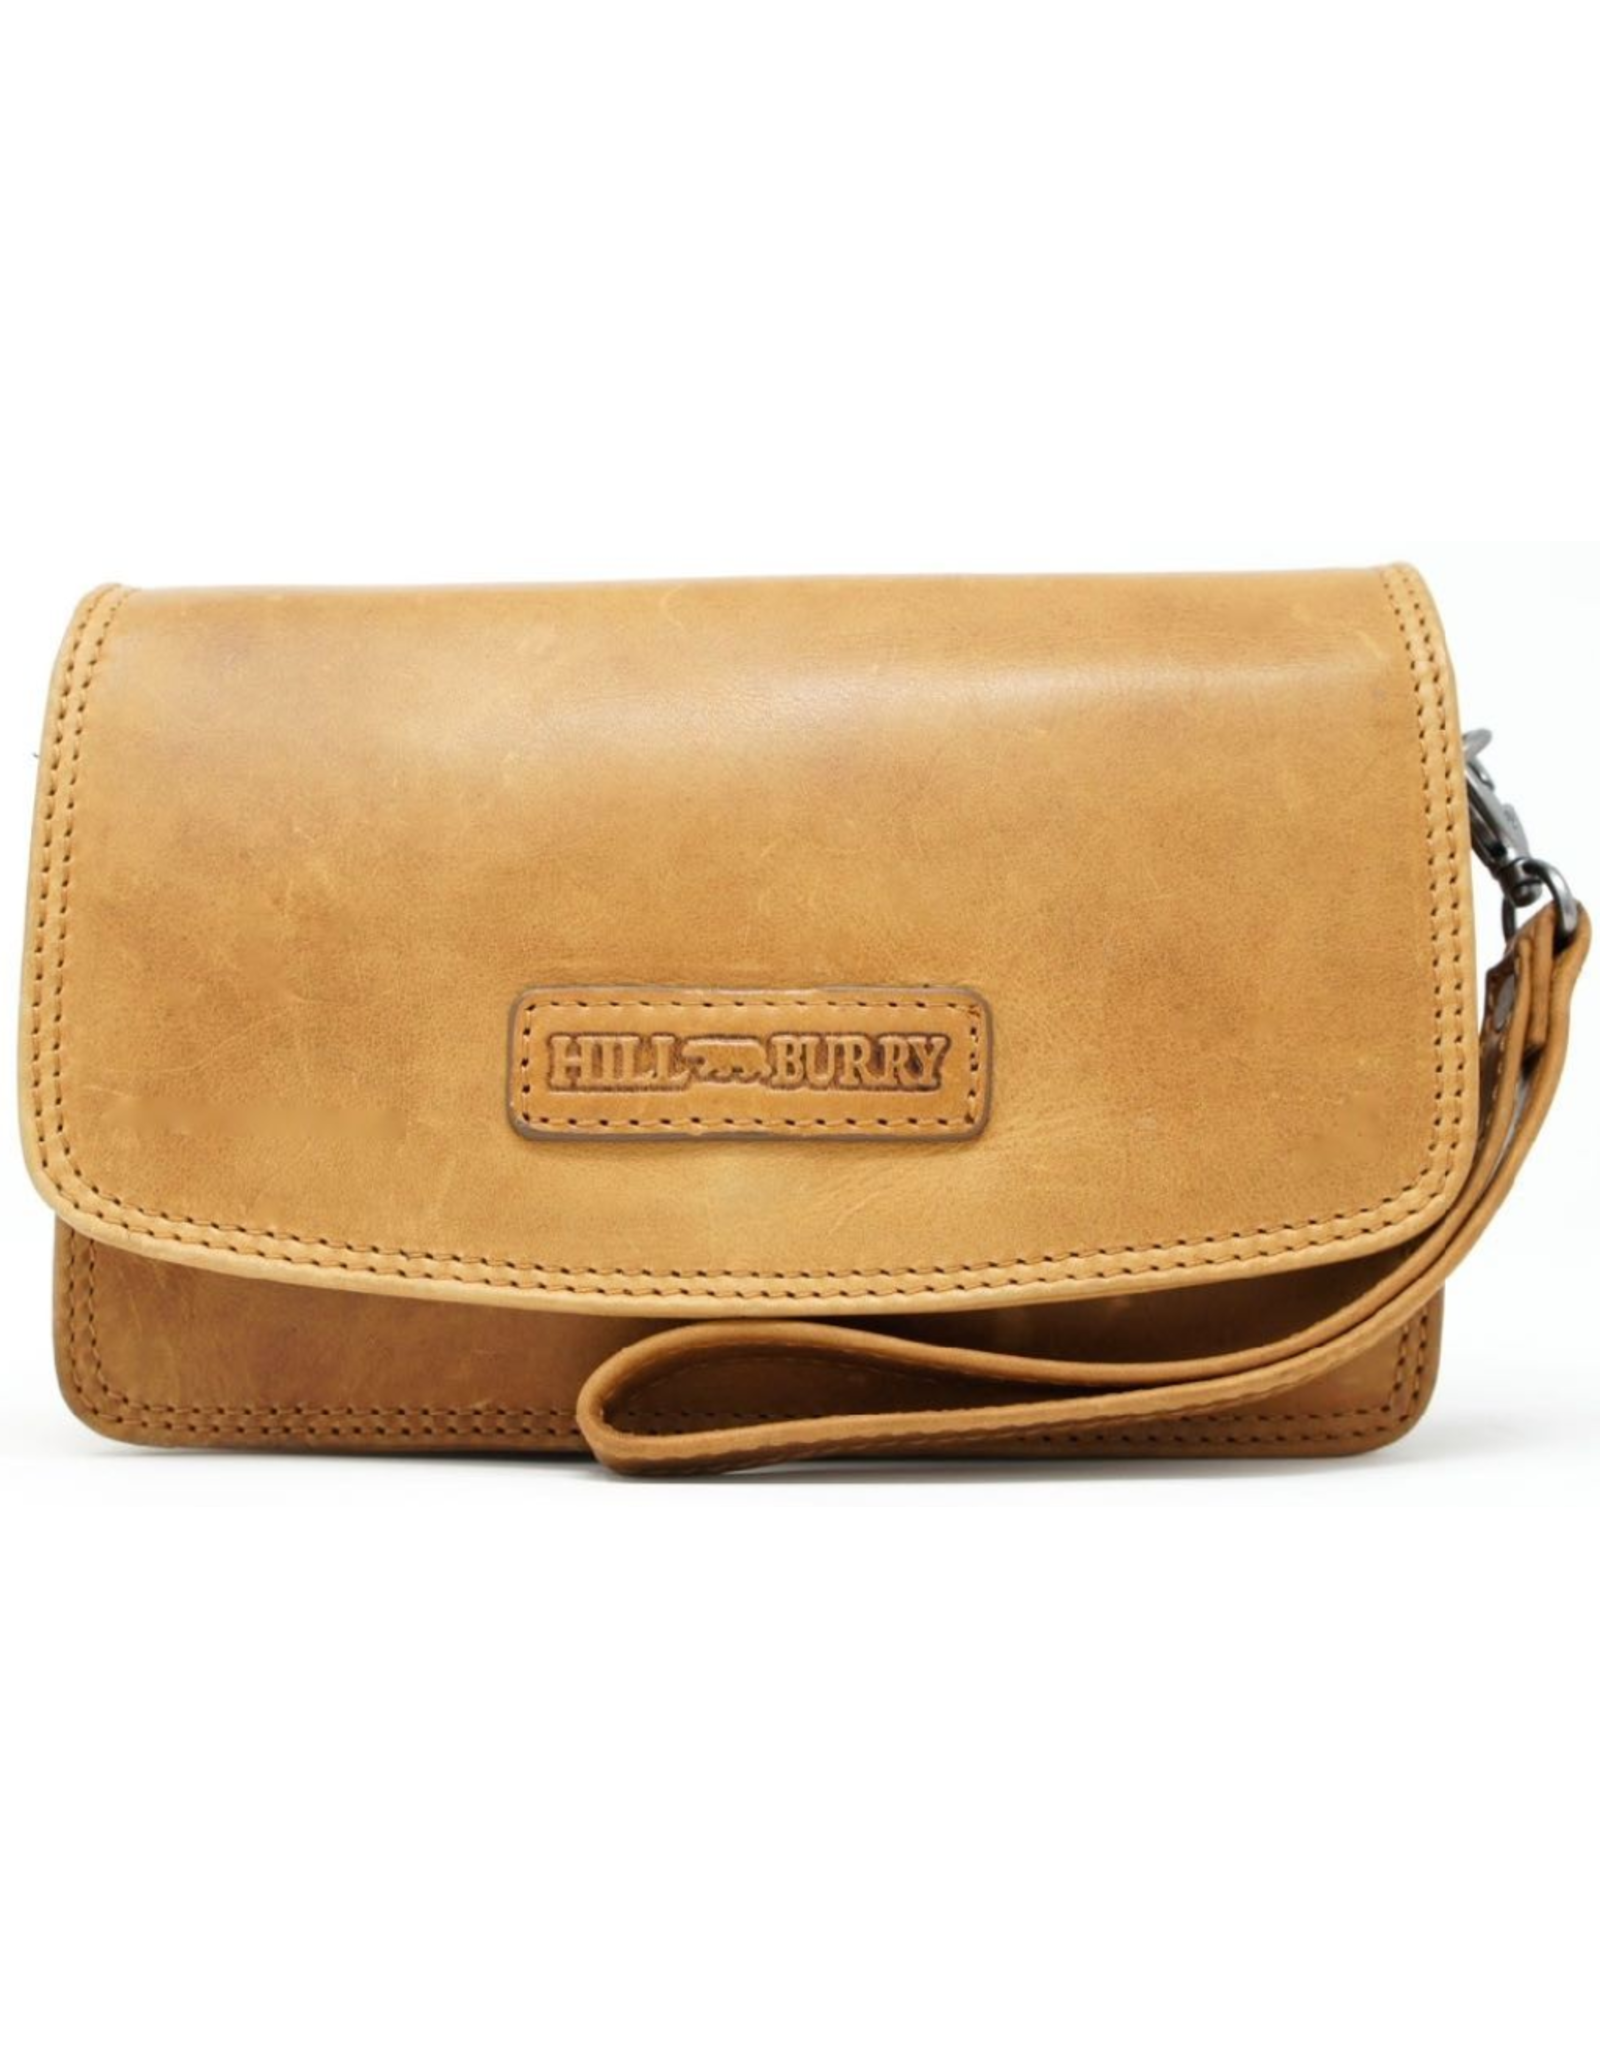 HillBurry Leather Festival bags, waist bags and belt bags - HillBurry Leather Shoulder Bag with Cover